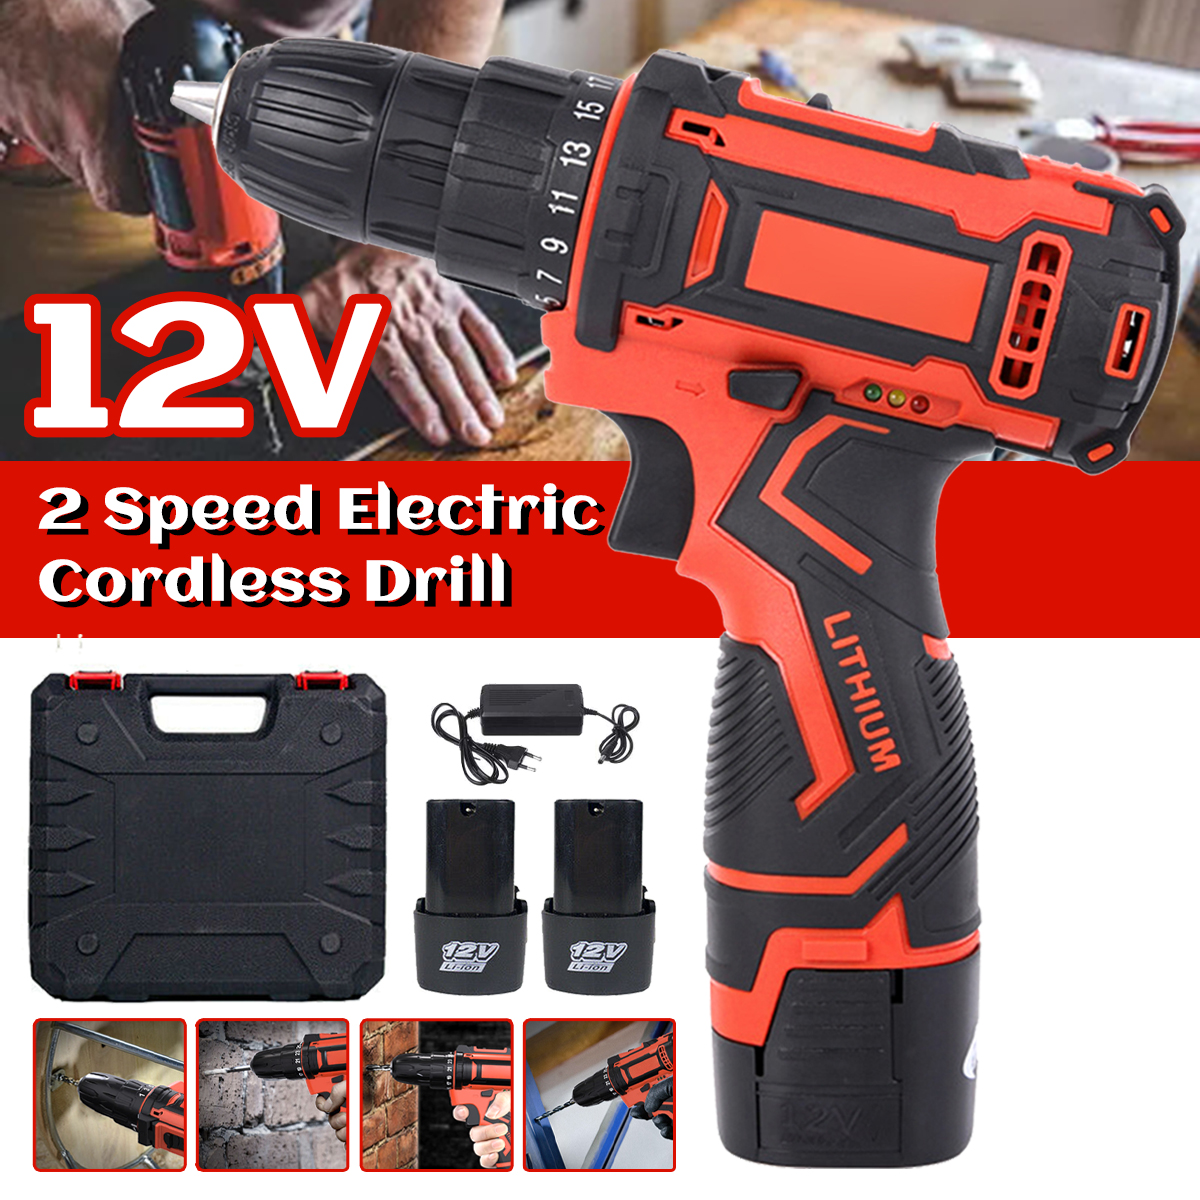 12V-Electric-Drill-Cordless-Wireless-Rechargeable-Electric-Screwdriver-Drill-Set-LED-W-12-Batteries--1860321-2